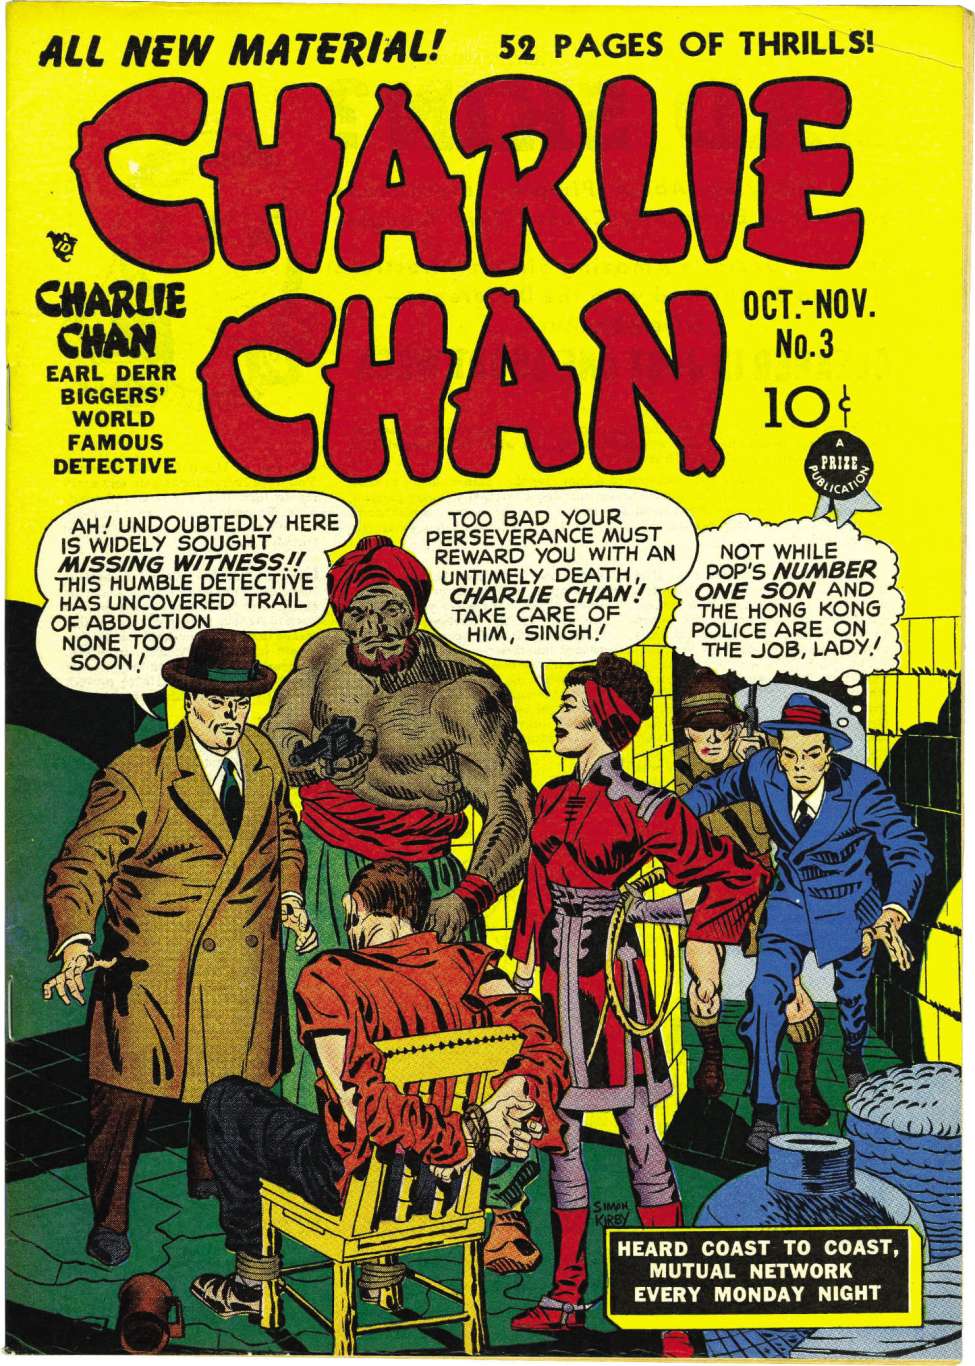 Book Cover For Charlie Chan 3